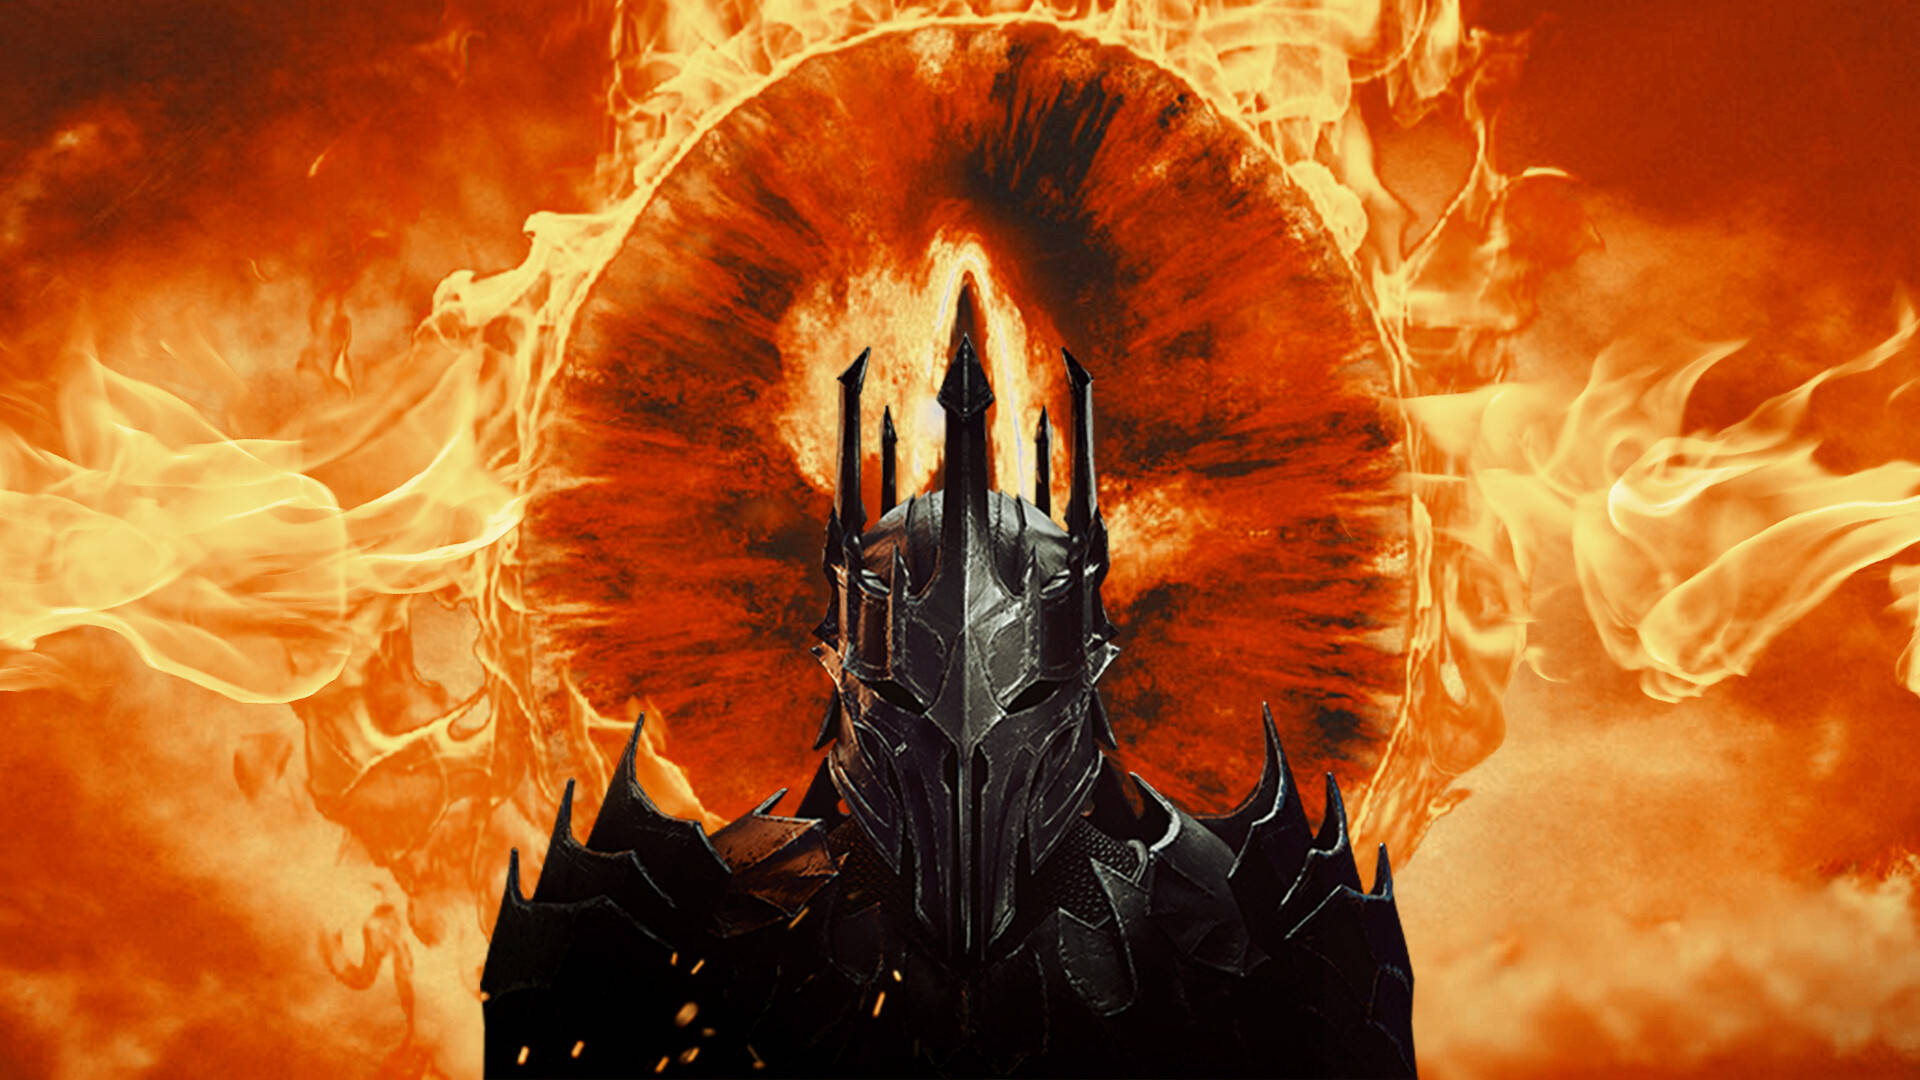 Download Necromancer And Eye Of Sauron Wallpaper